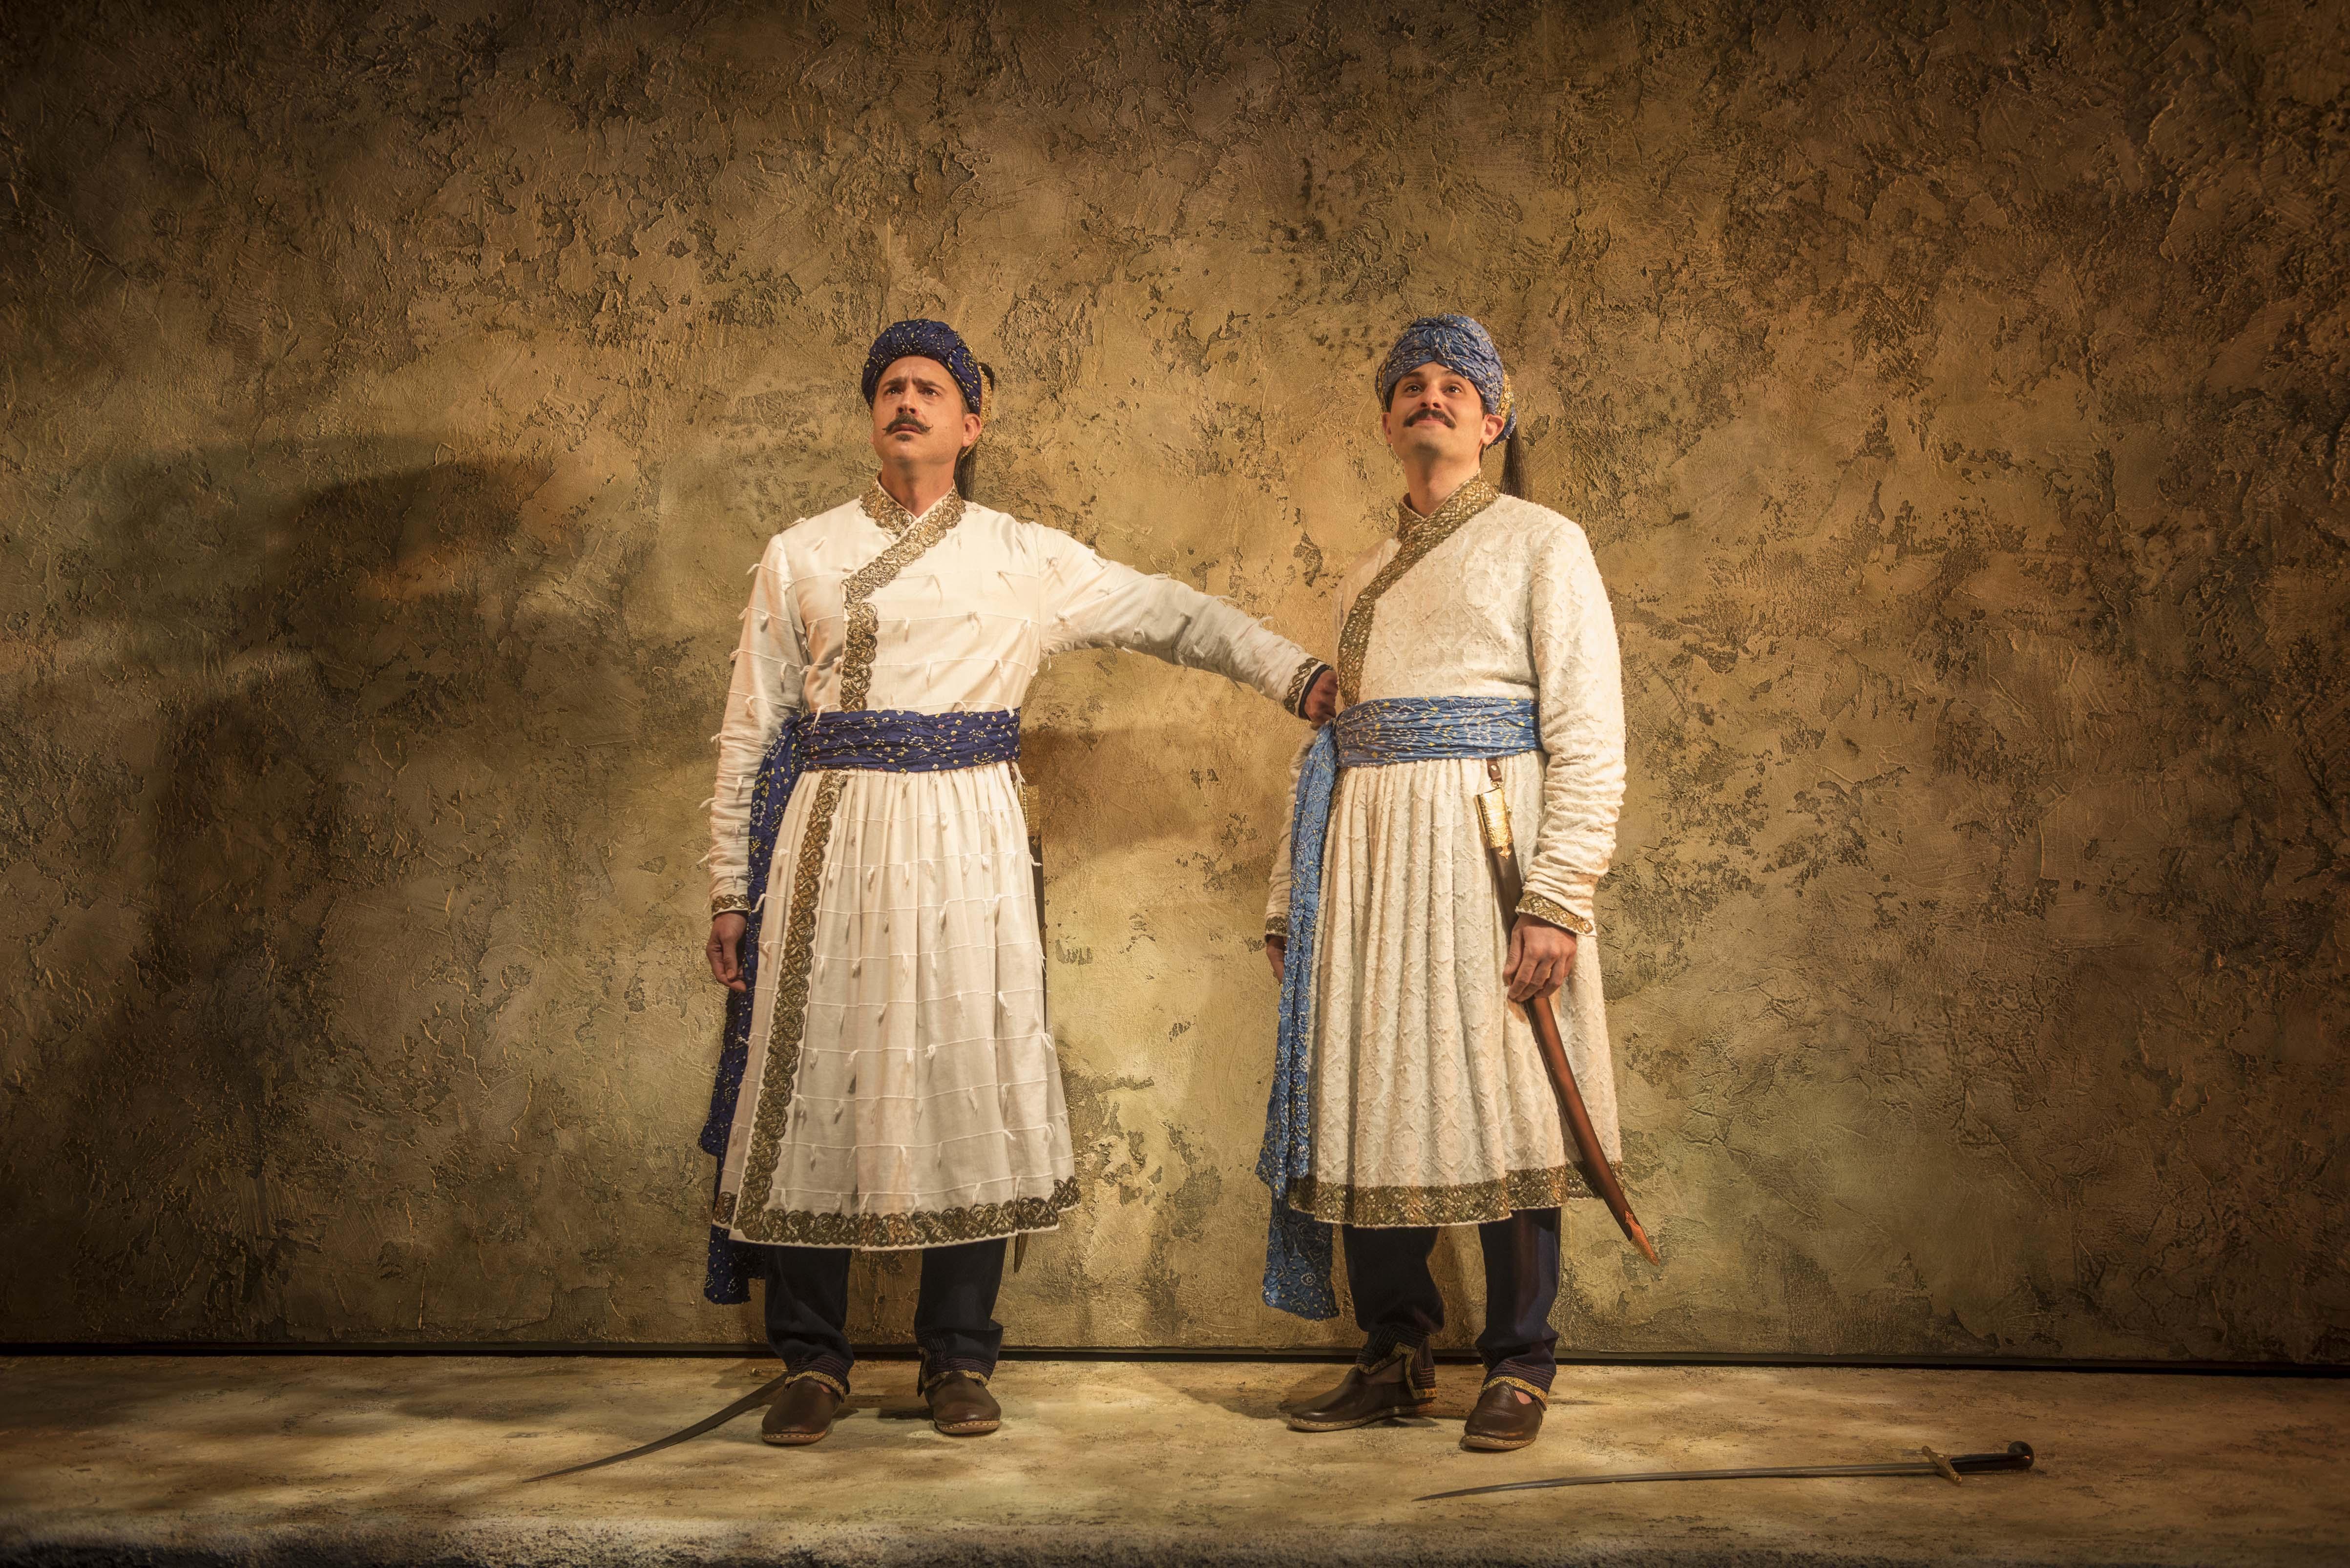 Omar Metwally and Arian Moayed in Steppenwolf’s Chicago premiere of “Guards at the Taj” by Rajiv Joseph. (Photo by Michael Brosilow)